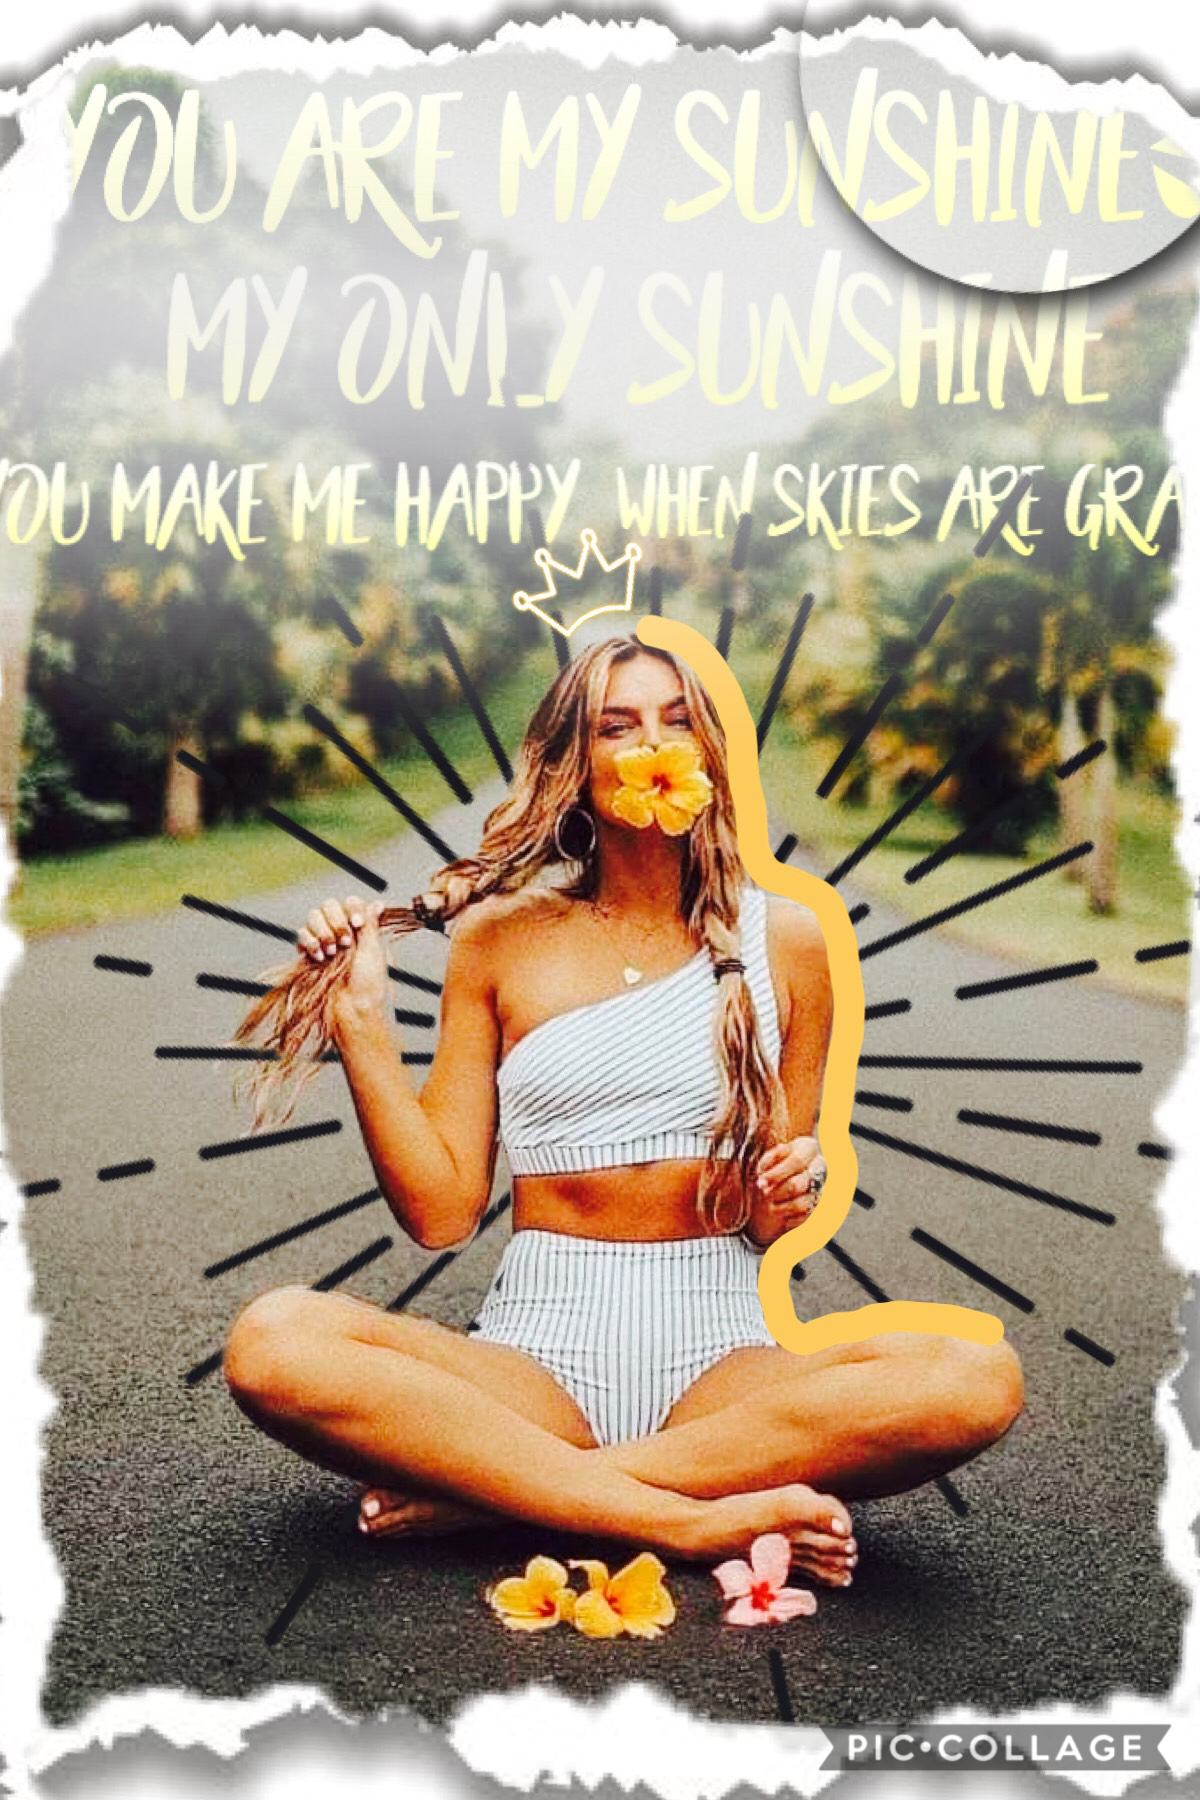 ☀️Tap☀️
I like this one but sry that the words for a bit cut off. Anyway hope u like this, leave a comment if u like or if you have feedback / ideas and ya

Bai 💓💓💓